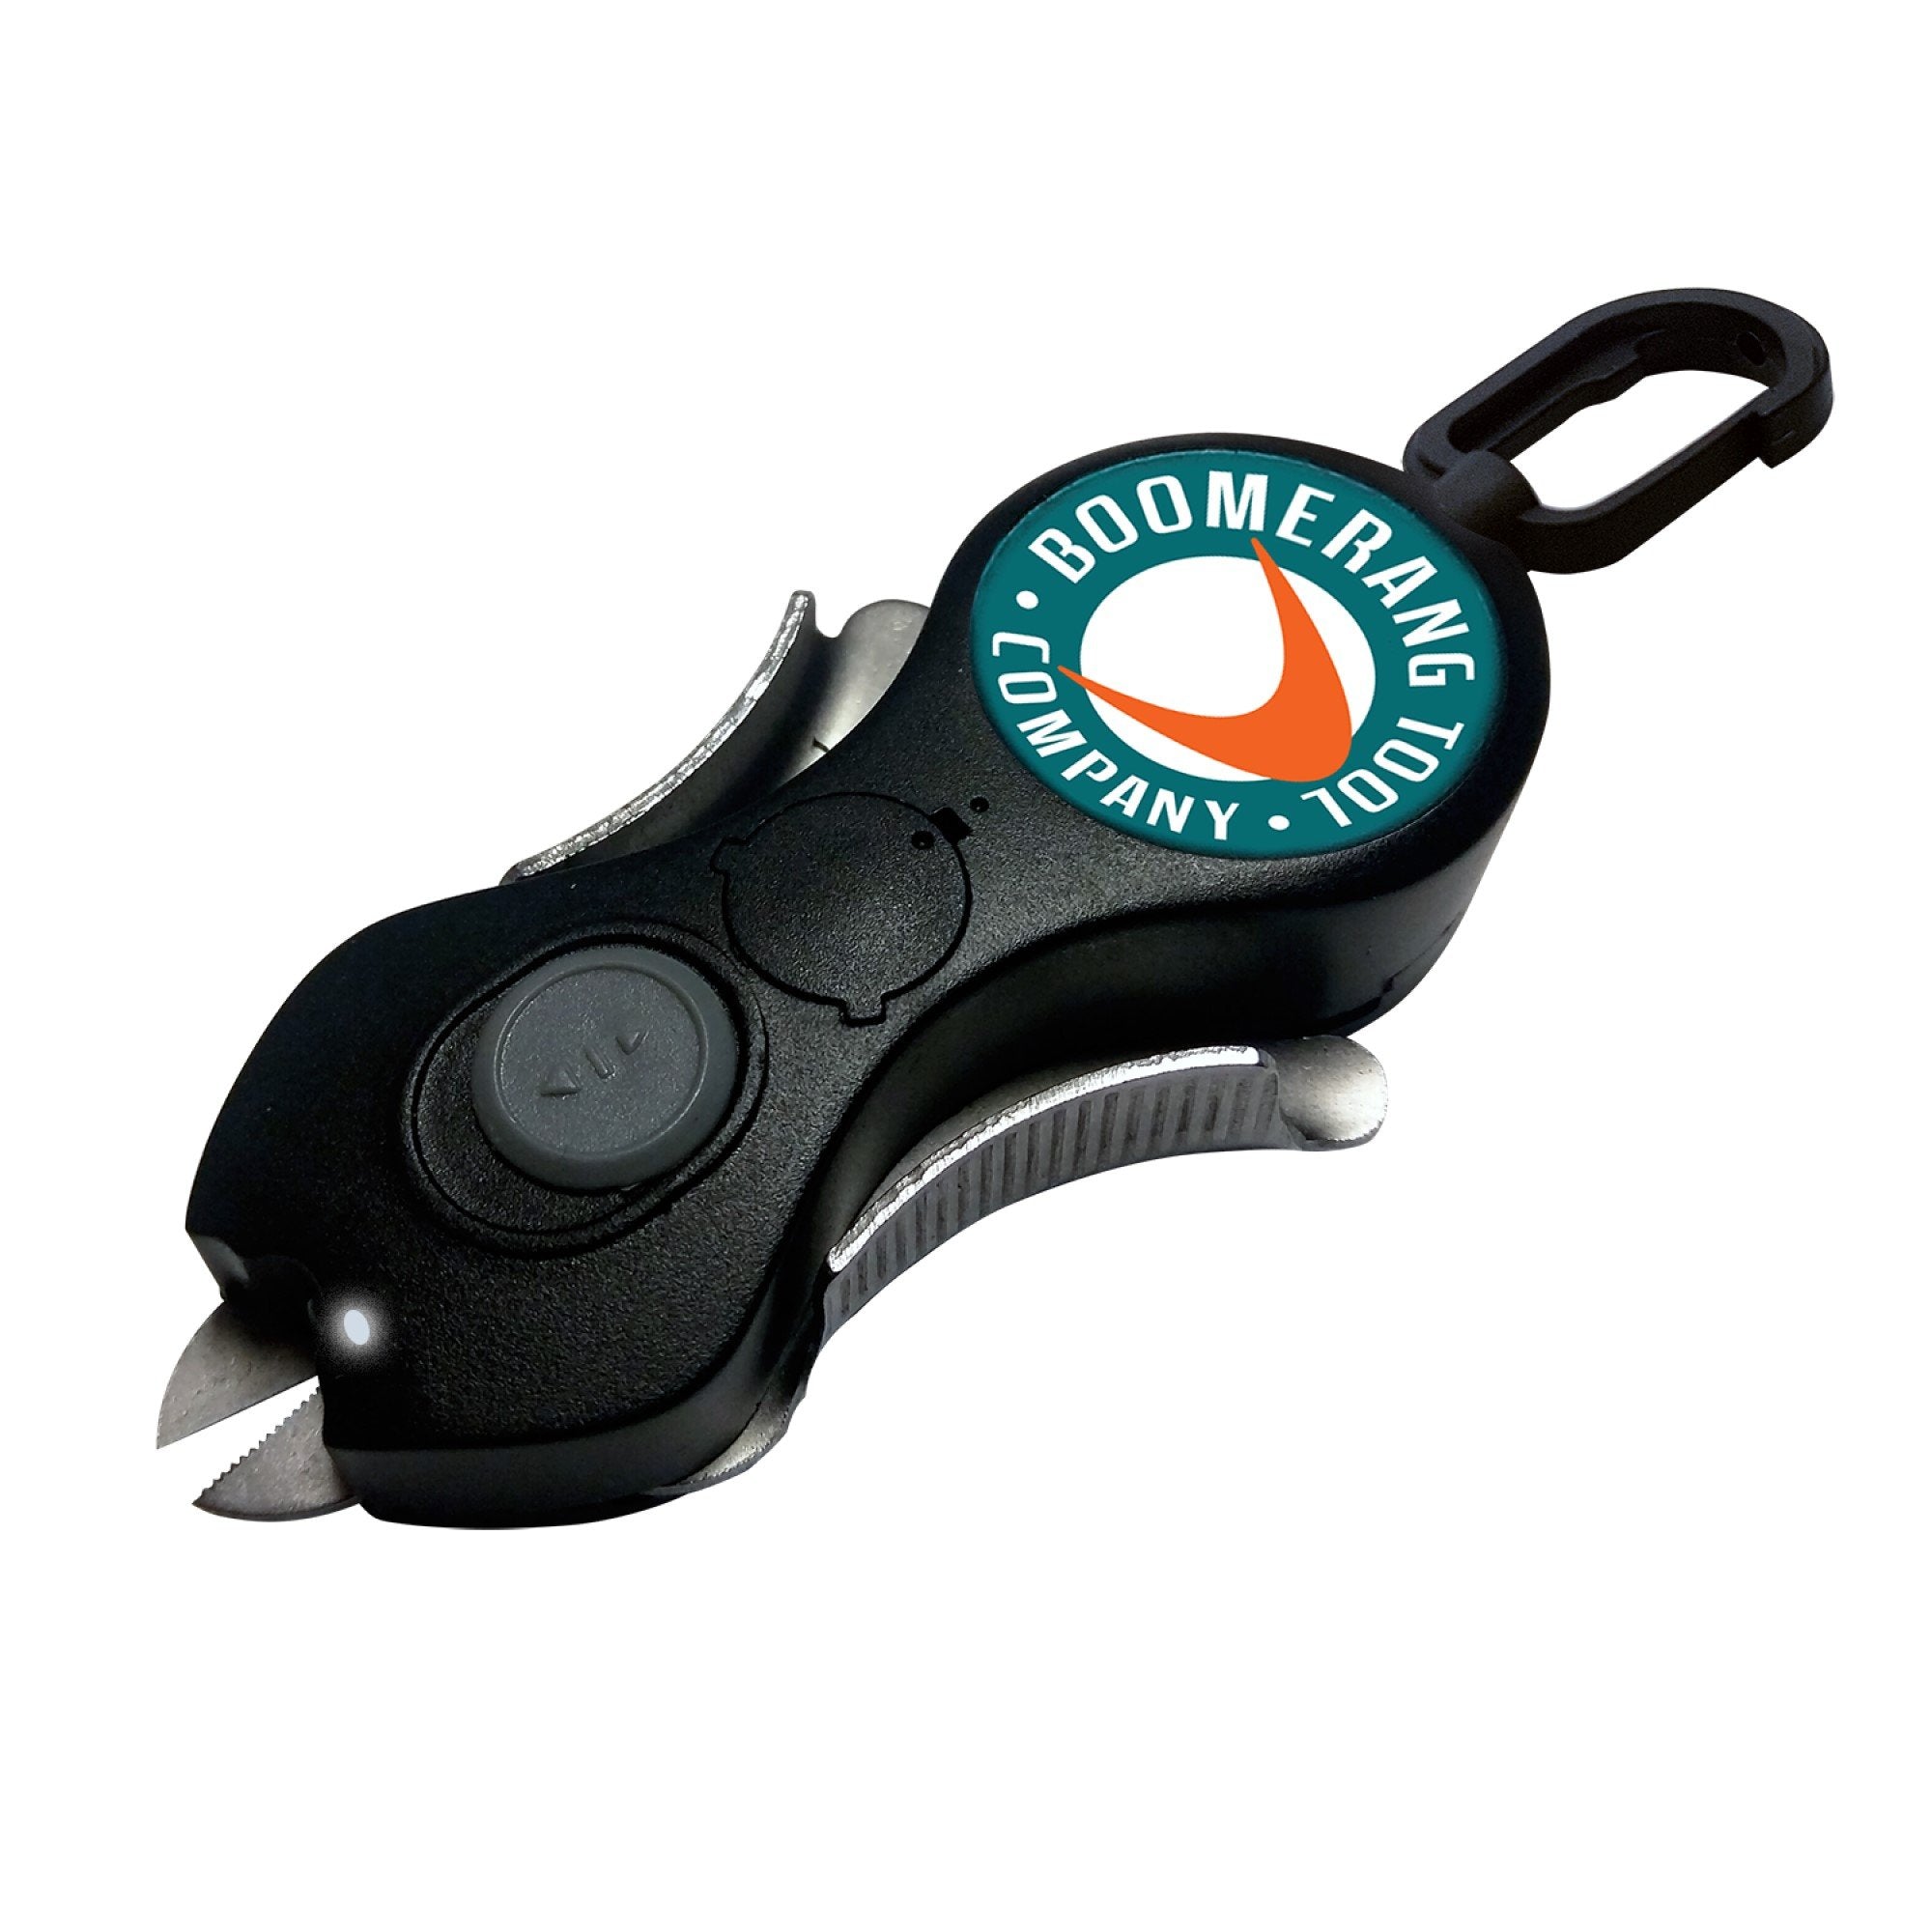 Original SNIP Fishing Line Cutter with LED Light for Fishing in Low Light  Conditions, Cuts 50 lb. Braided Fishing Line